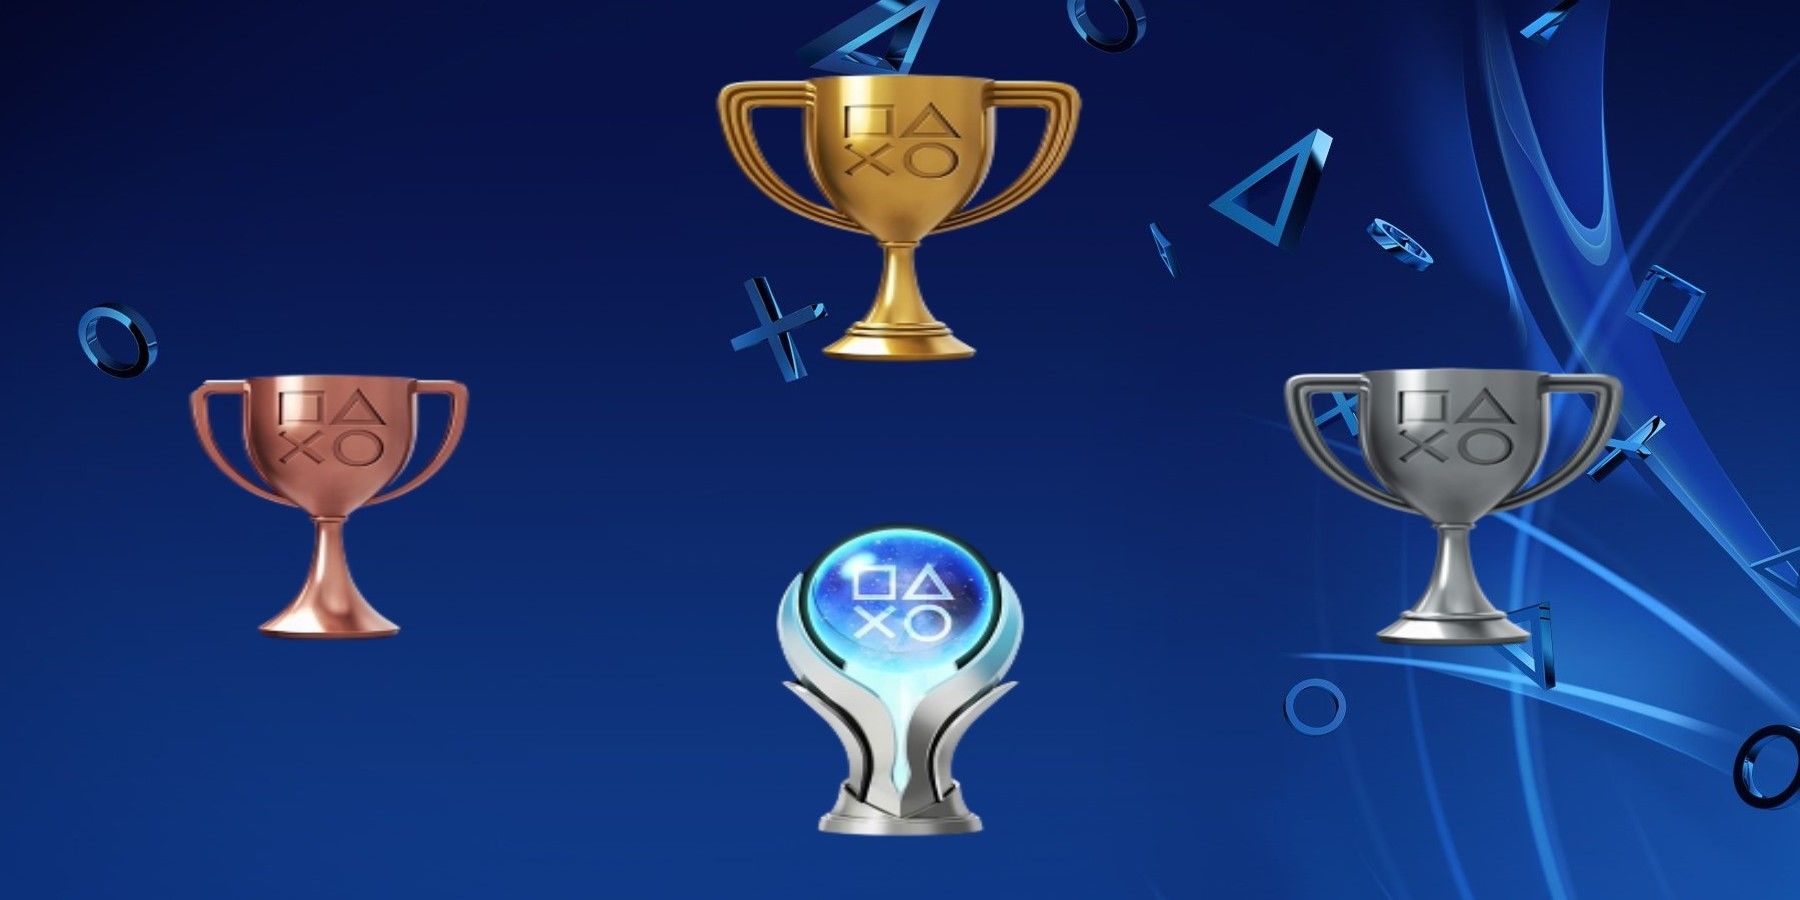 playstation-trophies-symbol-background